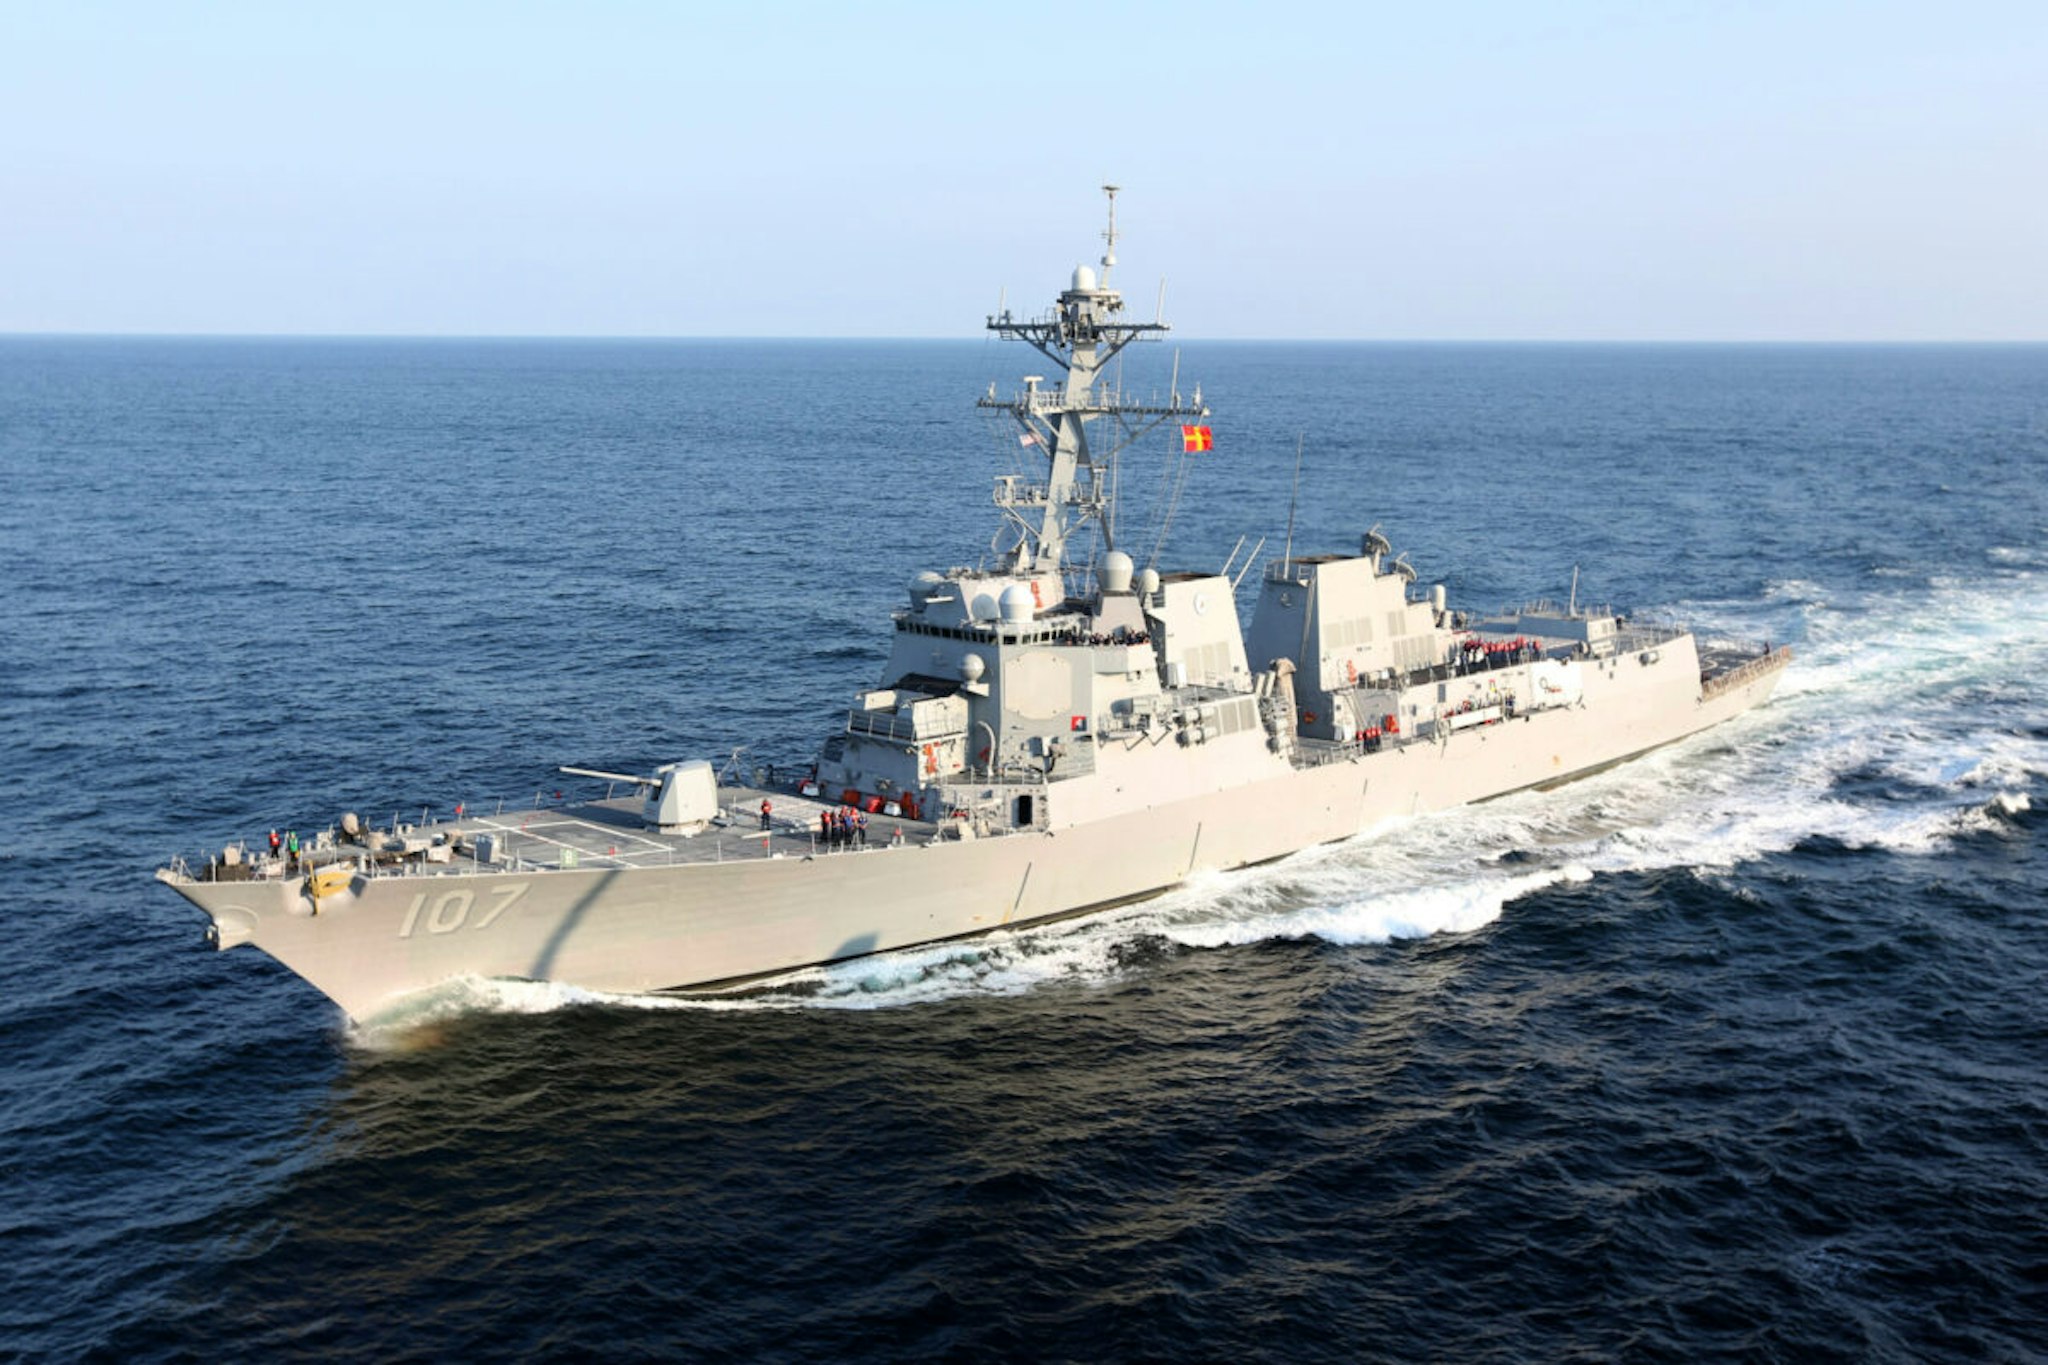 In this handout released by the U.S. Navy, the guided-missile destroyer USS Gravely (DDG 107) is seen August 2, 2012 in the Atlantic Ocean.